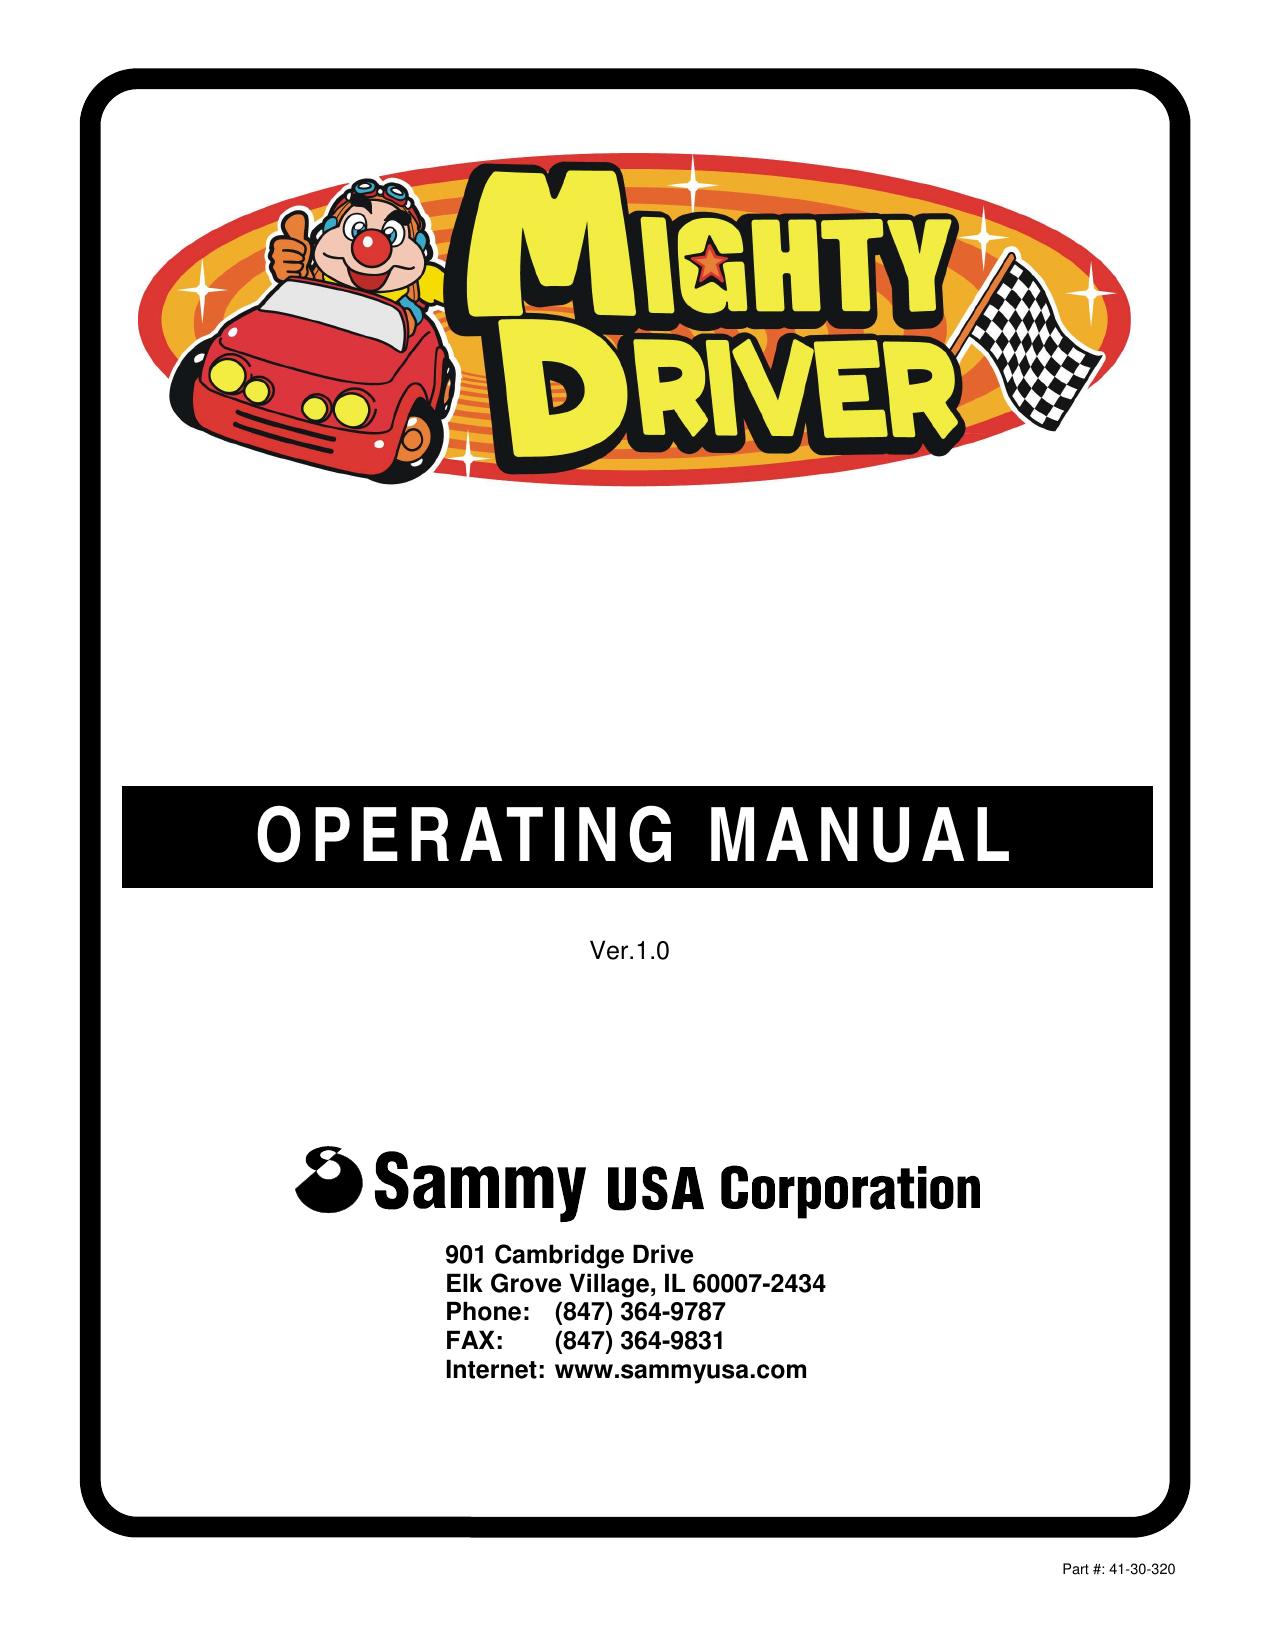 030201 New EP-ROM Mighty Driver Operating Manual.pub